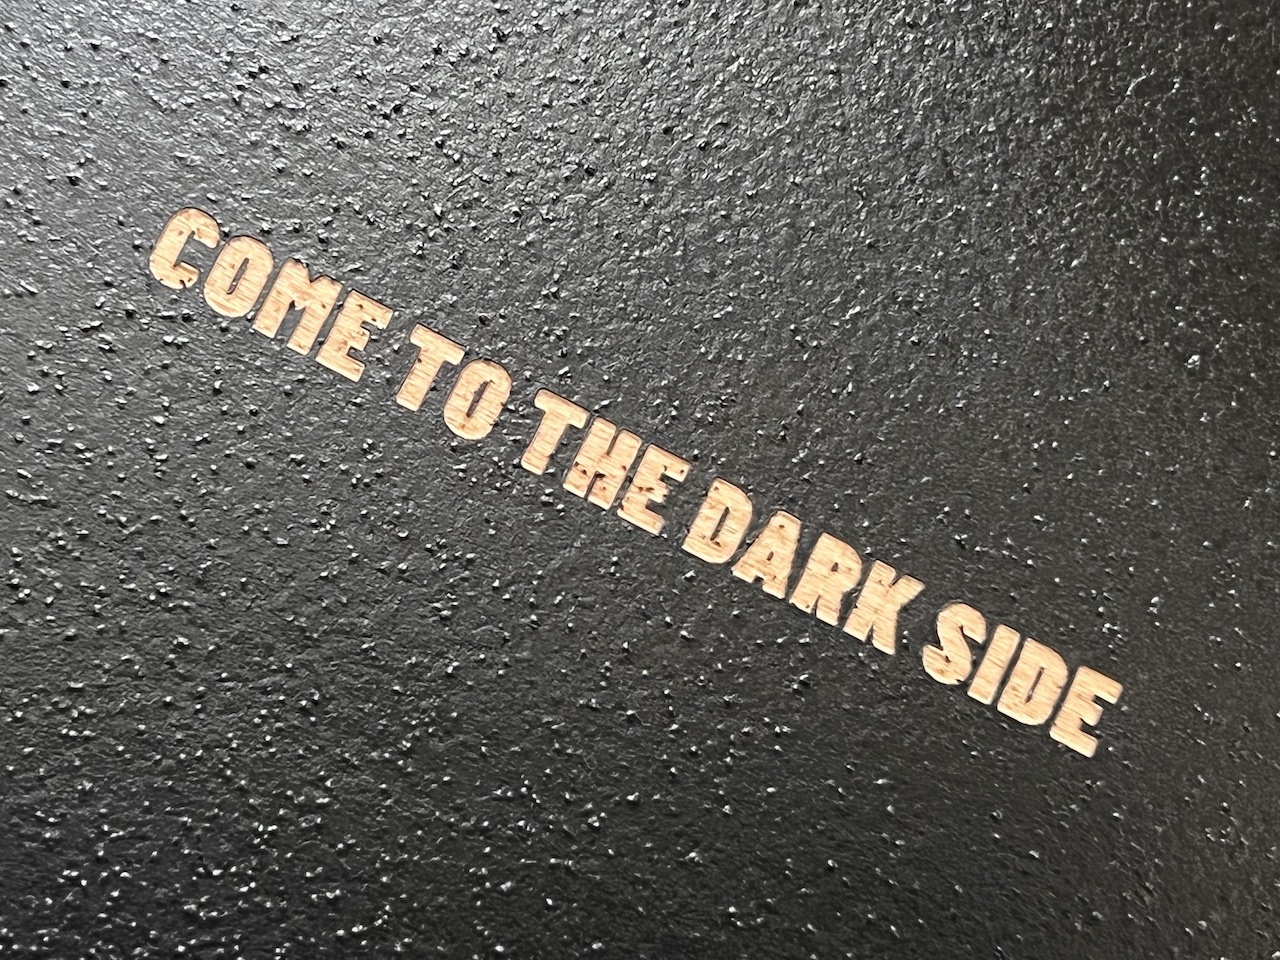 COME TO THE DARK SIDE